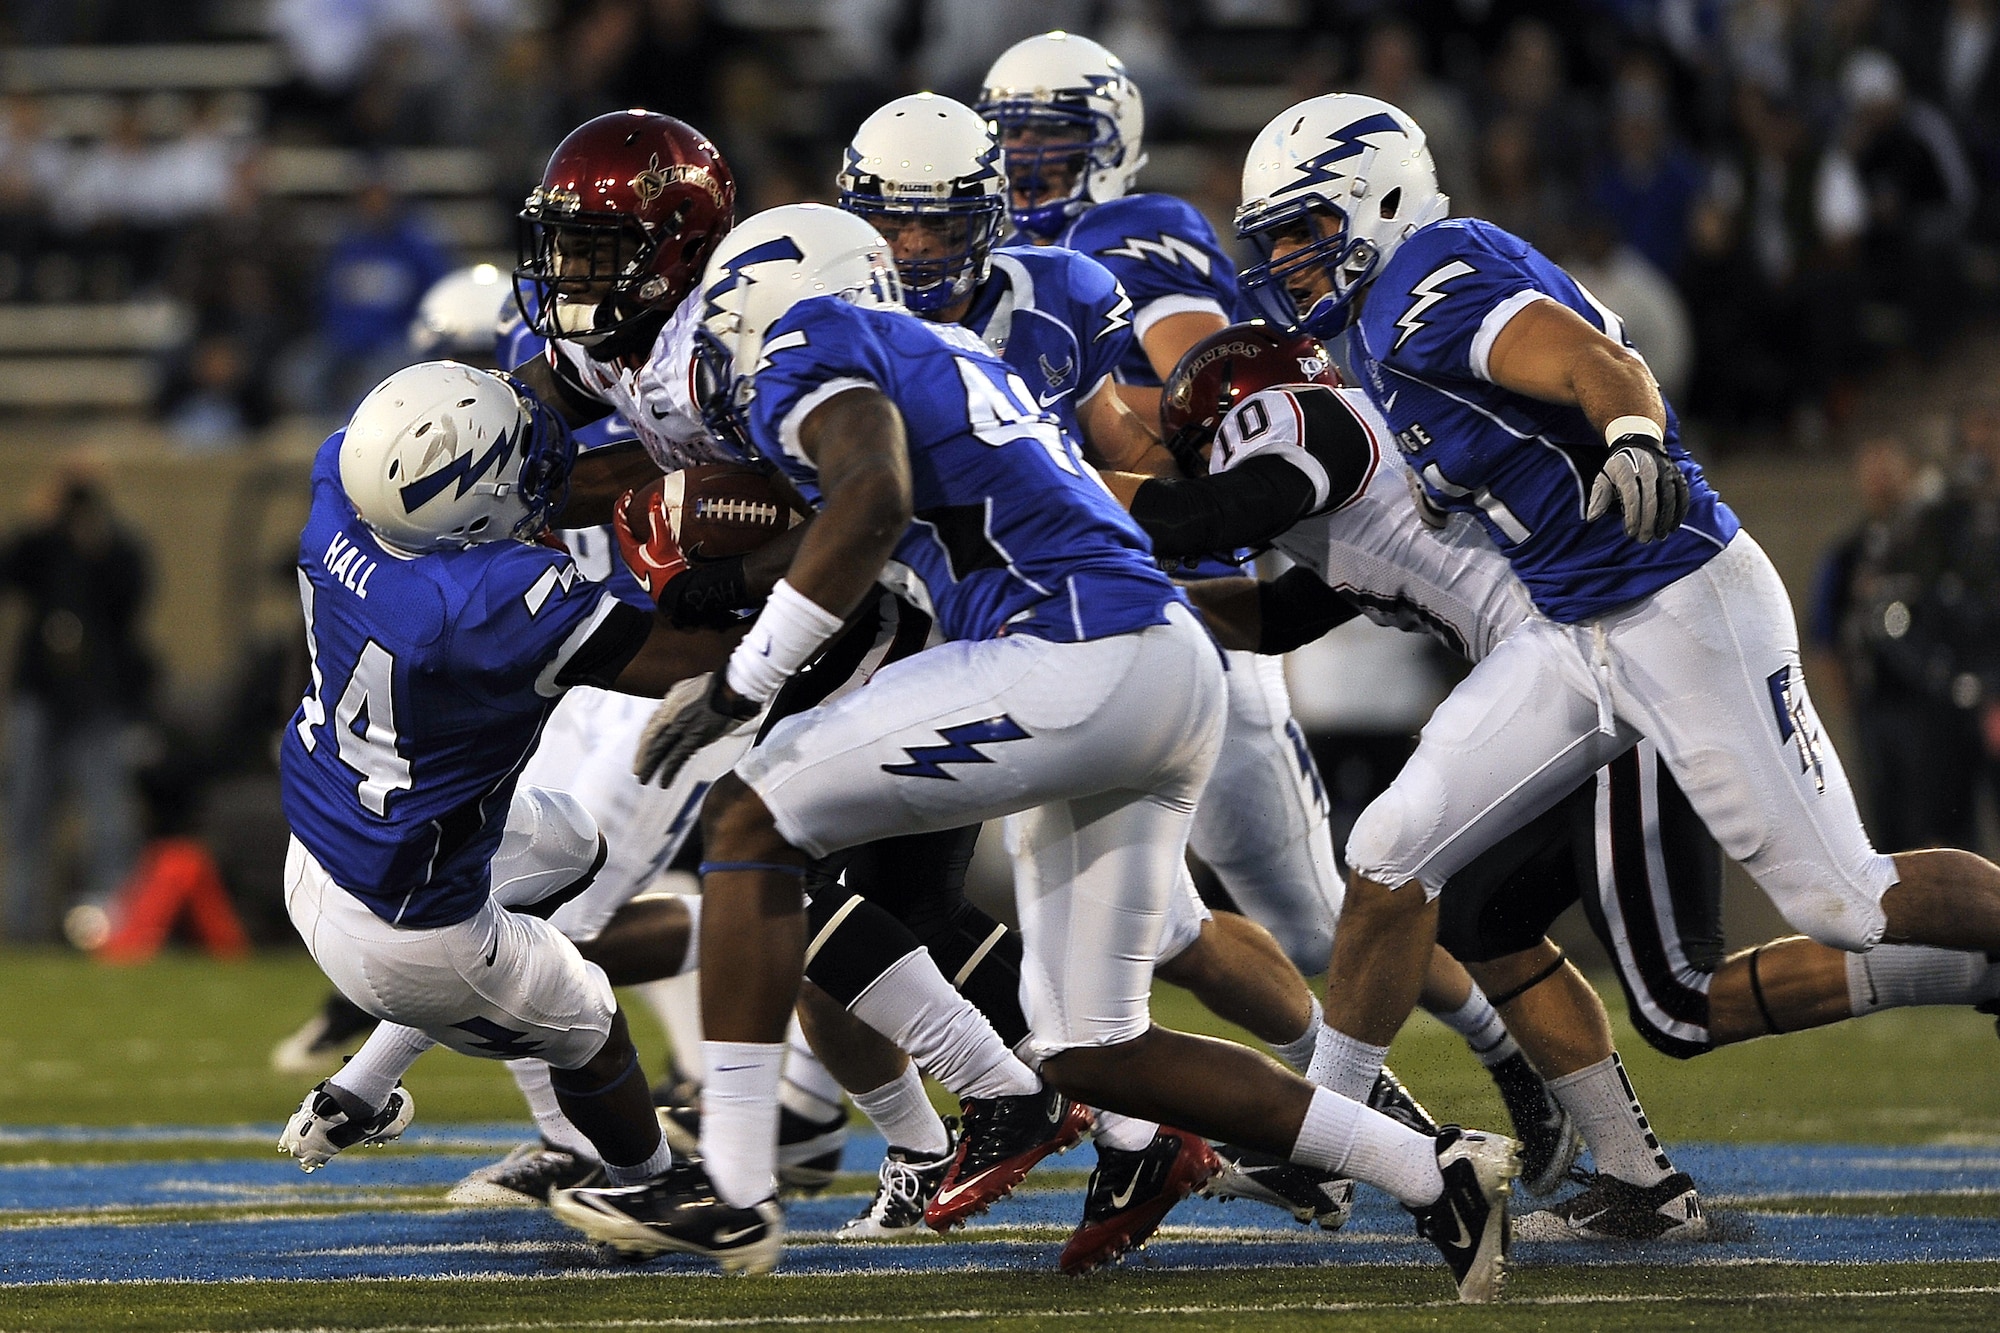 Air Force defensive back Josh Hall leads a tackle during the Falcons' match against San Diego State at Falcon Stadium Oct. 13, 2011. Hall had eight tackles, including five solo tackles, in the Falcons' 41-27 defeat. (U.S. Air Force photo/Bill Evans)